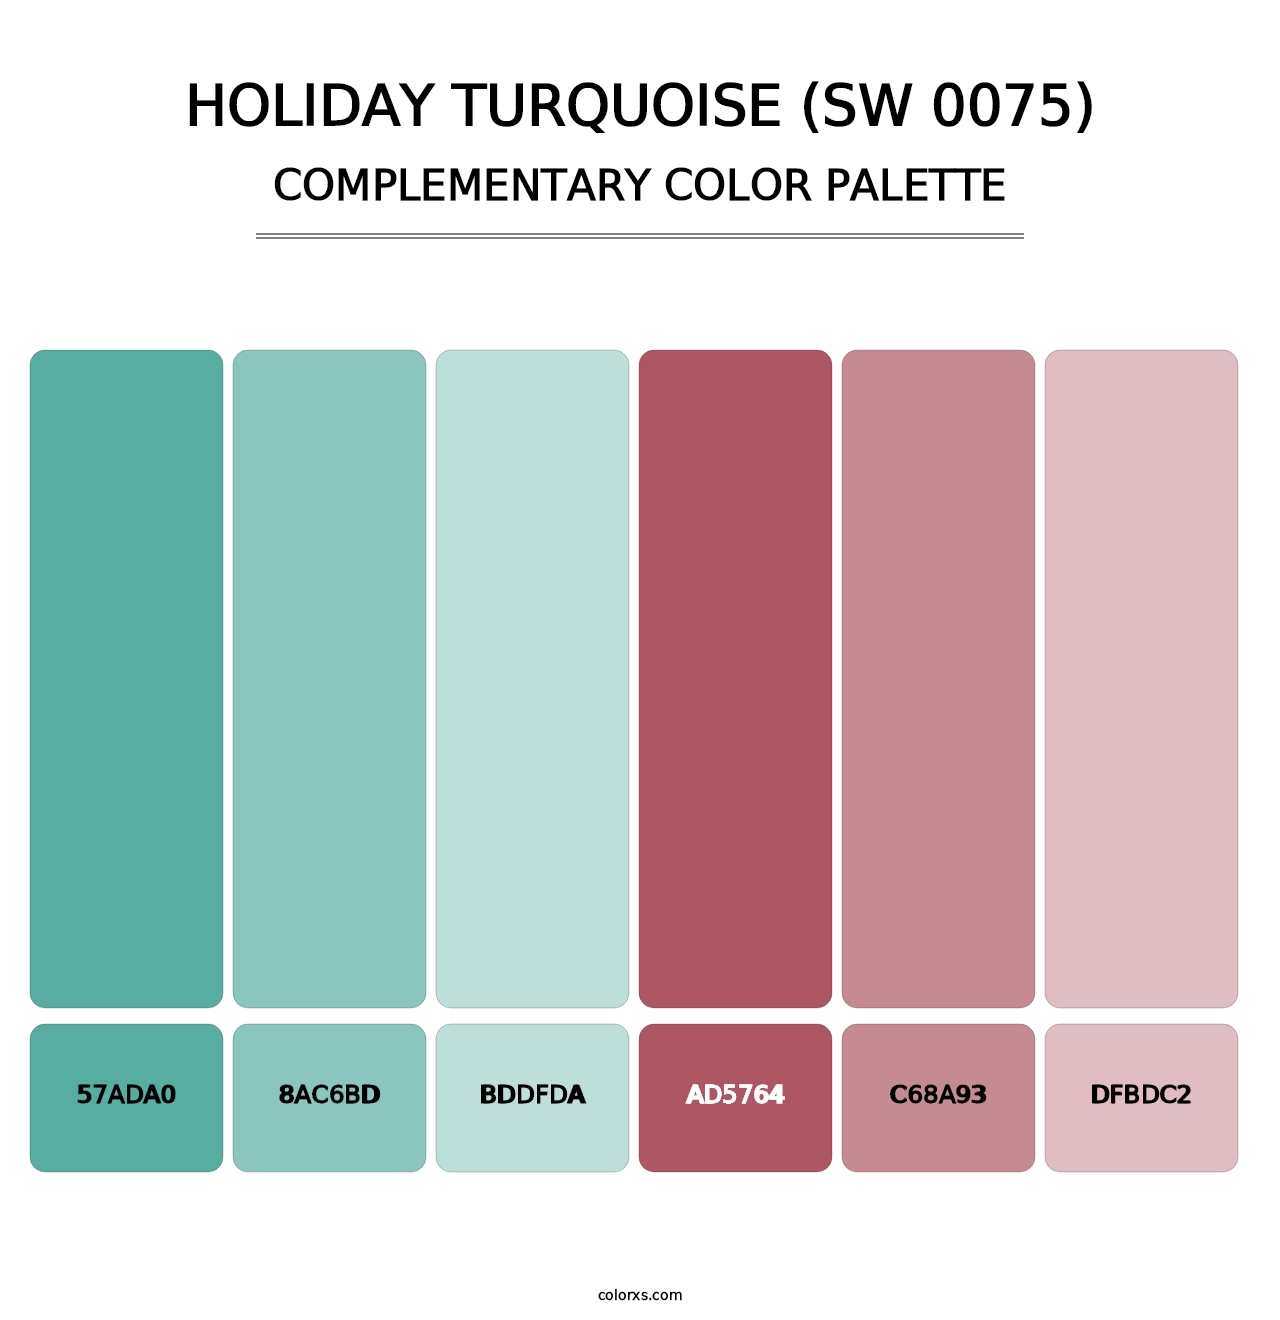 Holiday Turquoise (SW 0075) - Complementary Color Palette